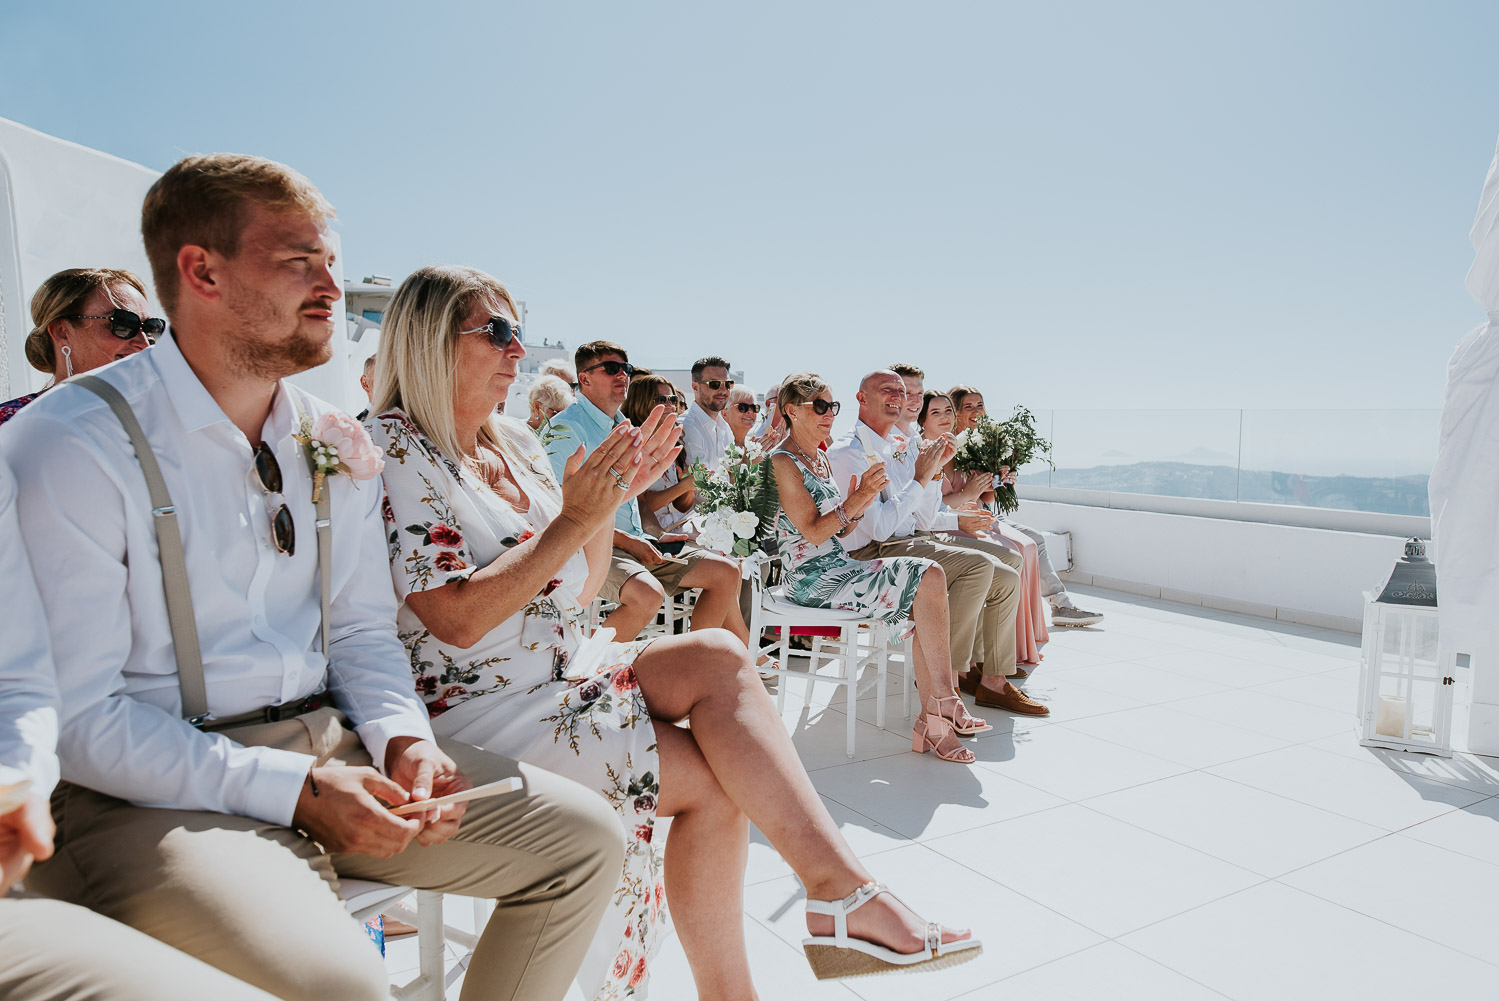 Wedding photographer Santorini: close up pf the guests clapping sat at the ceremony terrace basked in the summer sun by Ben and Vesna.